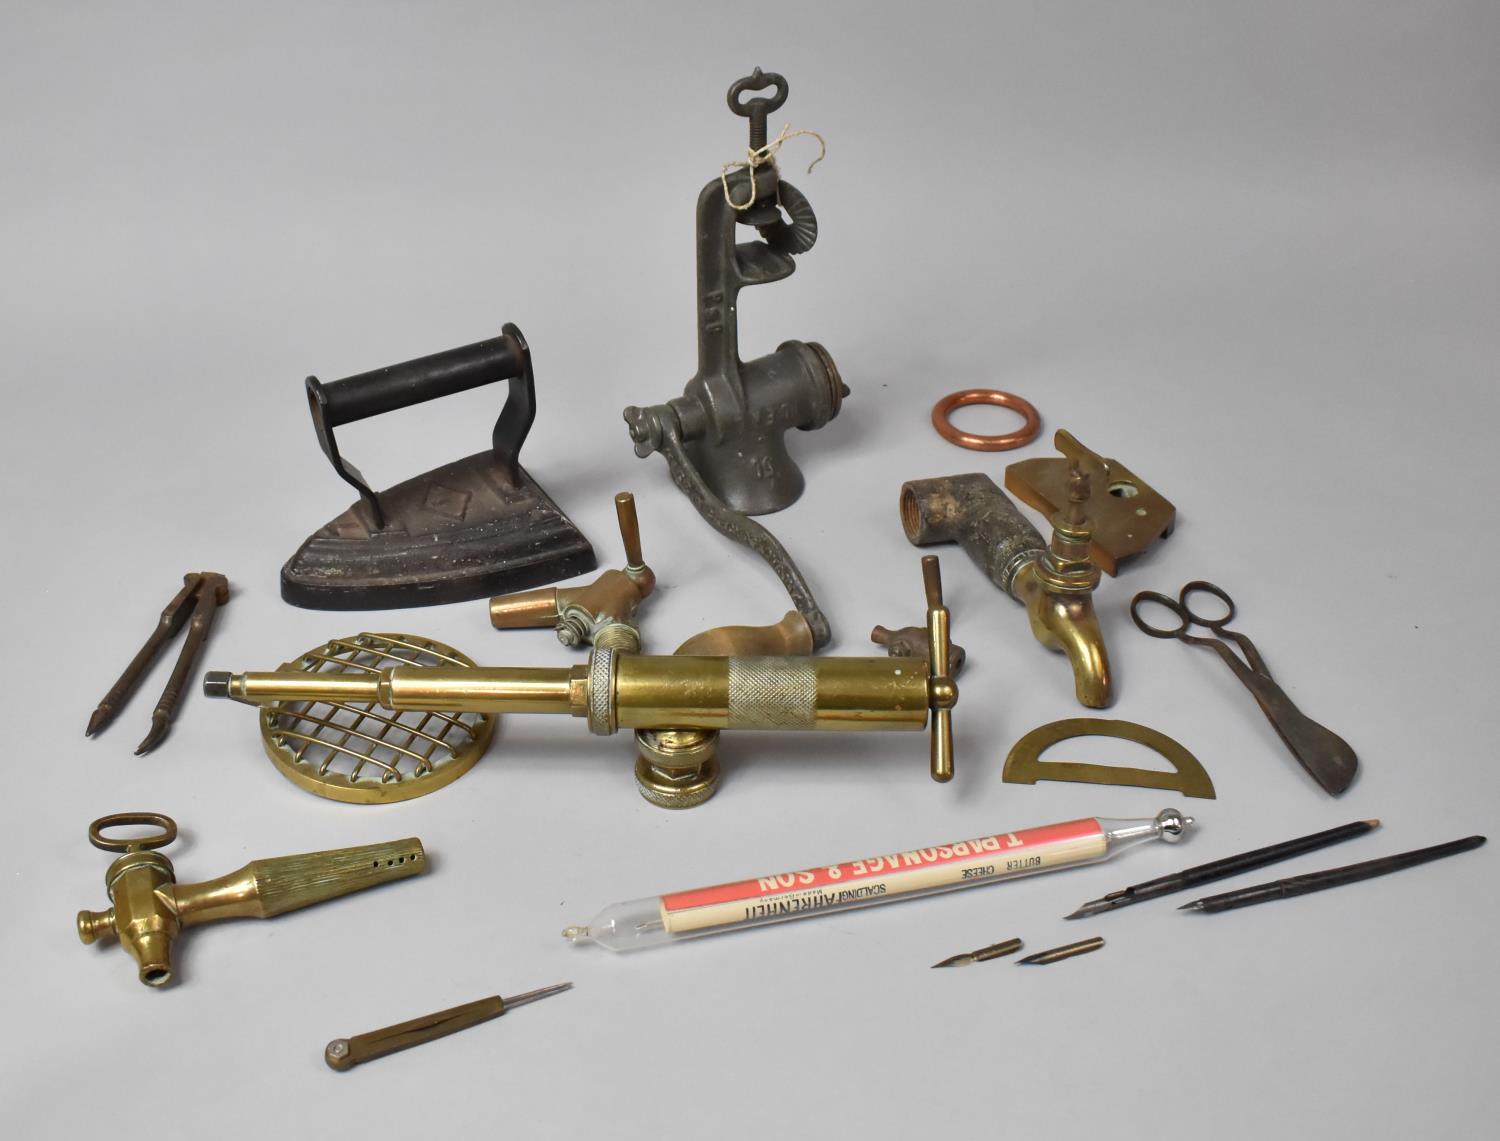 A Collection of Metalwares to Include Brass Taps, Brass Sprayer Head, Flat Iron, Mincer etc